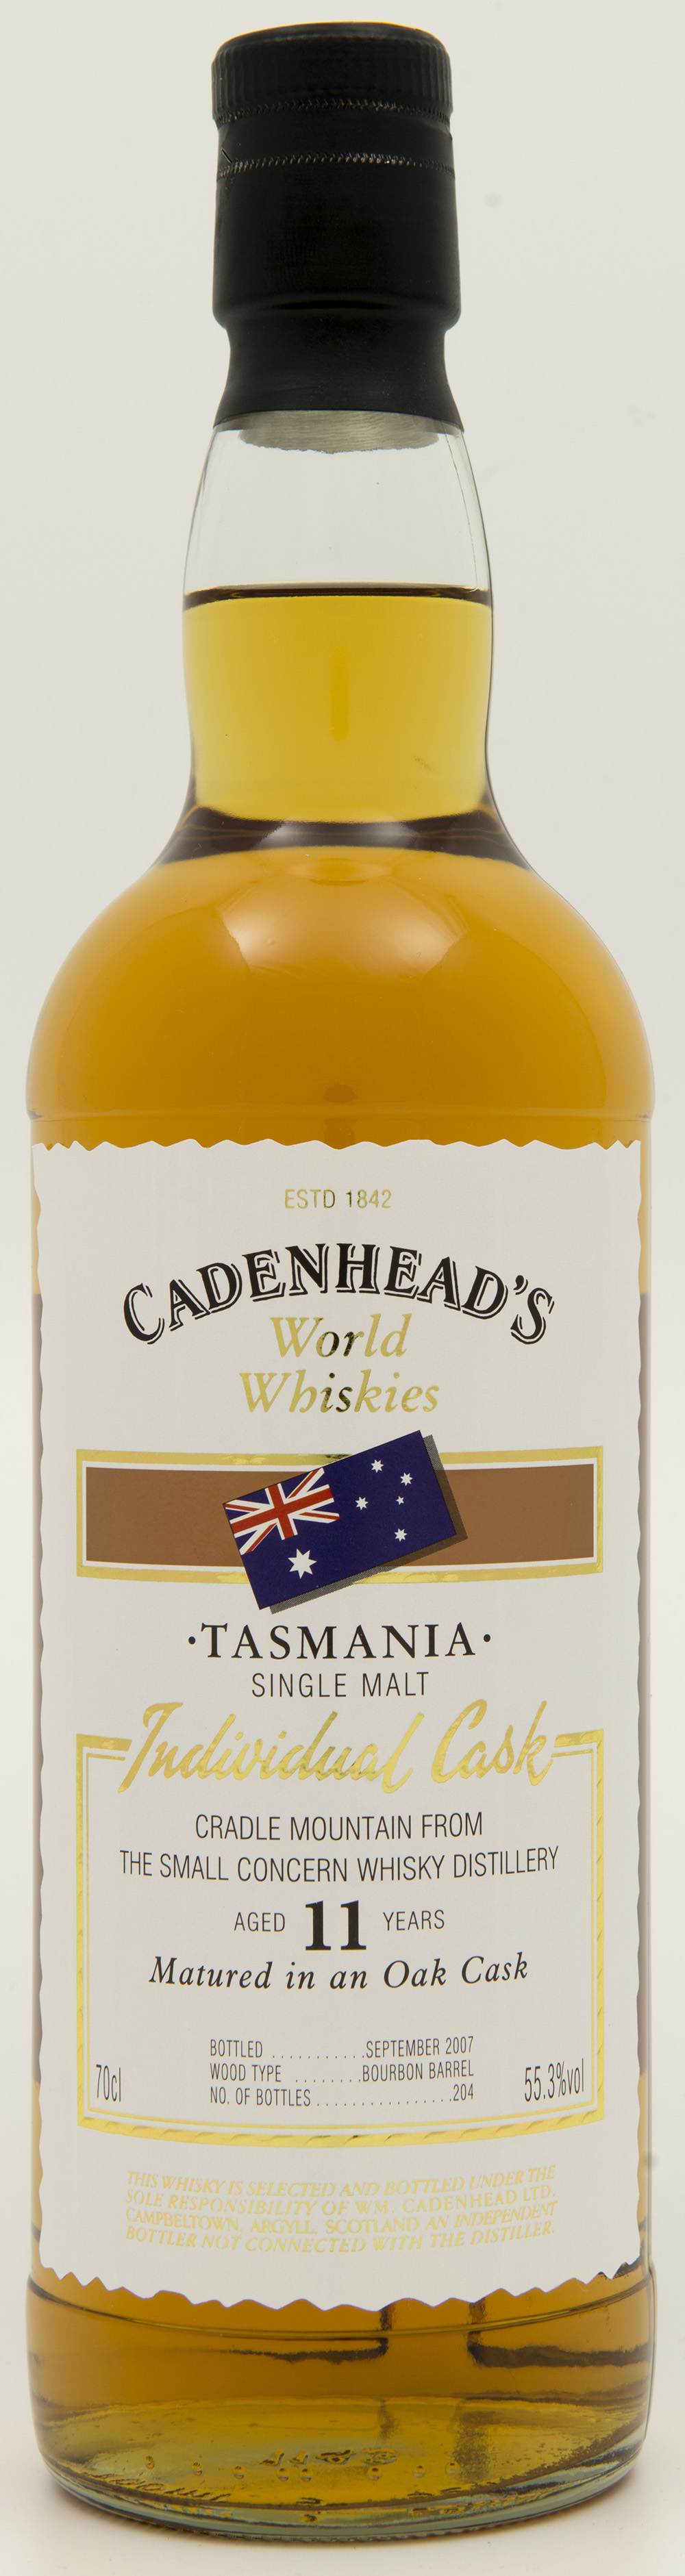 Billede: DSC_4809 - Cadenheads World Whiskies - Cradle Mountain from the Small Concern Distillery - 11 years - bottle front.jpg